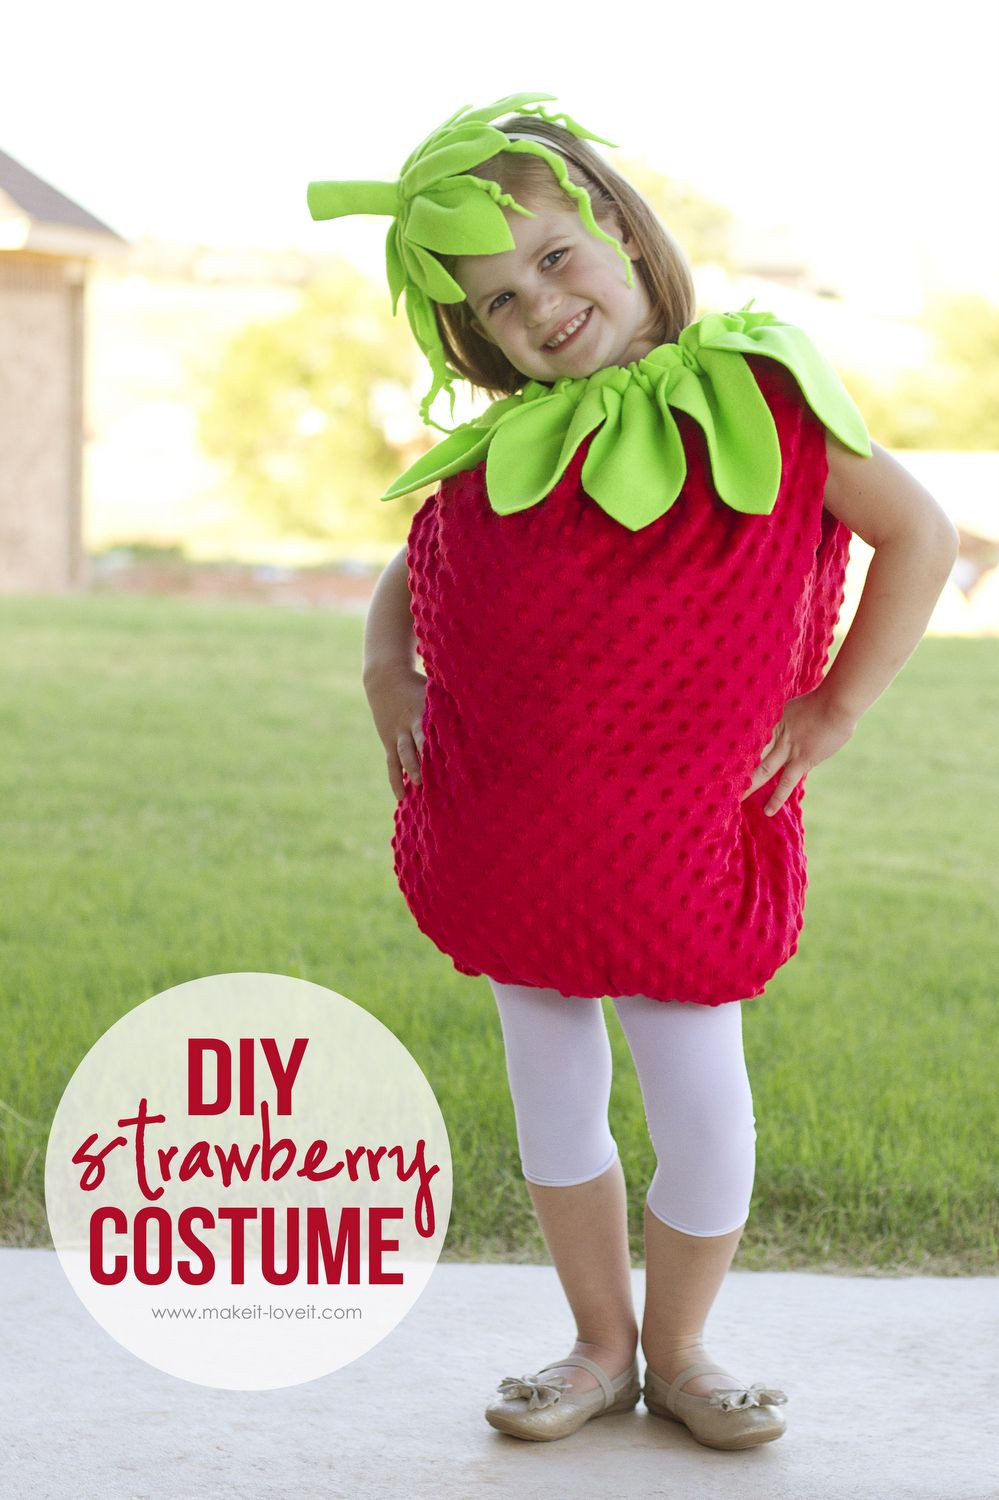 Strawberry Costume DIY
 DIY Strawberry Costume…a tutorial plus one to GIVE AWAY